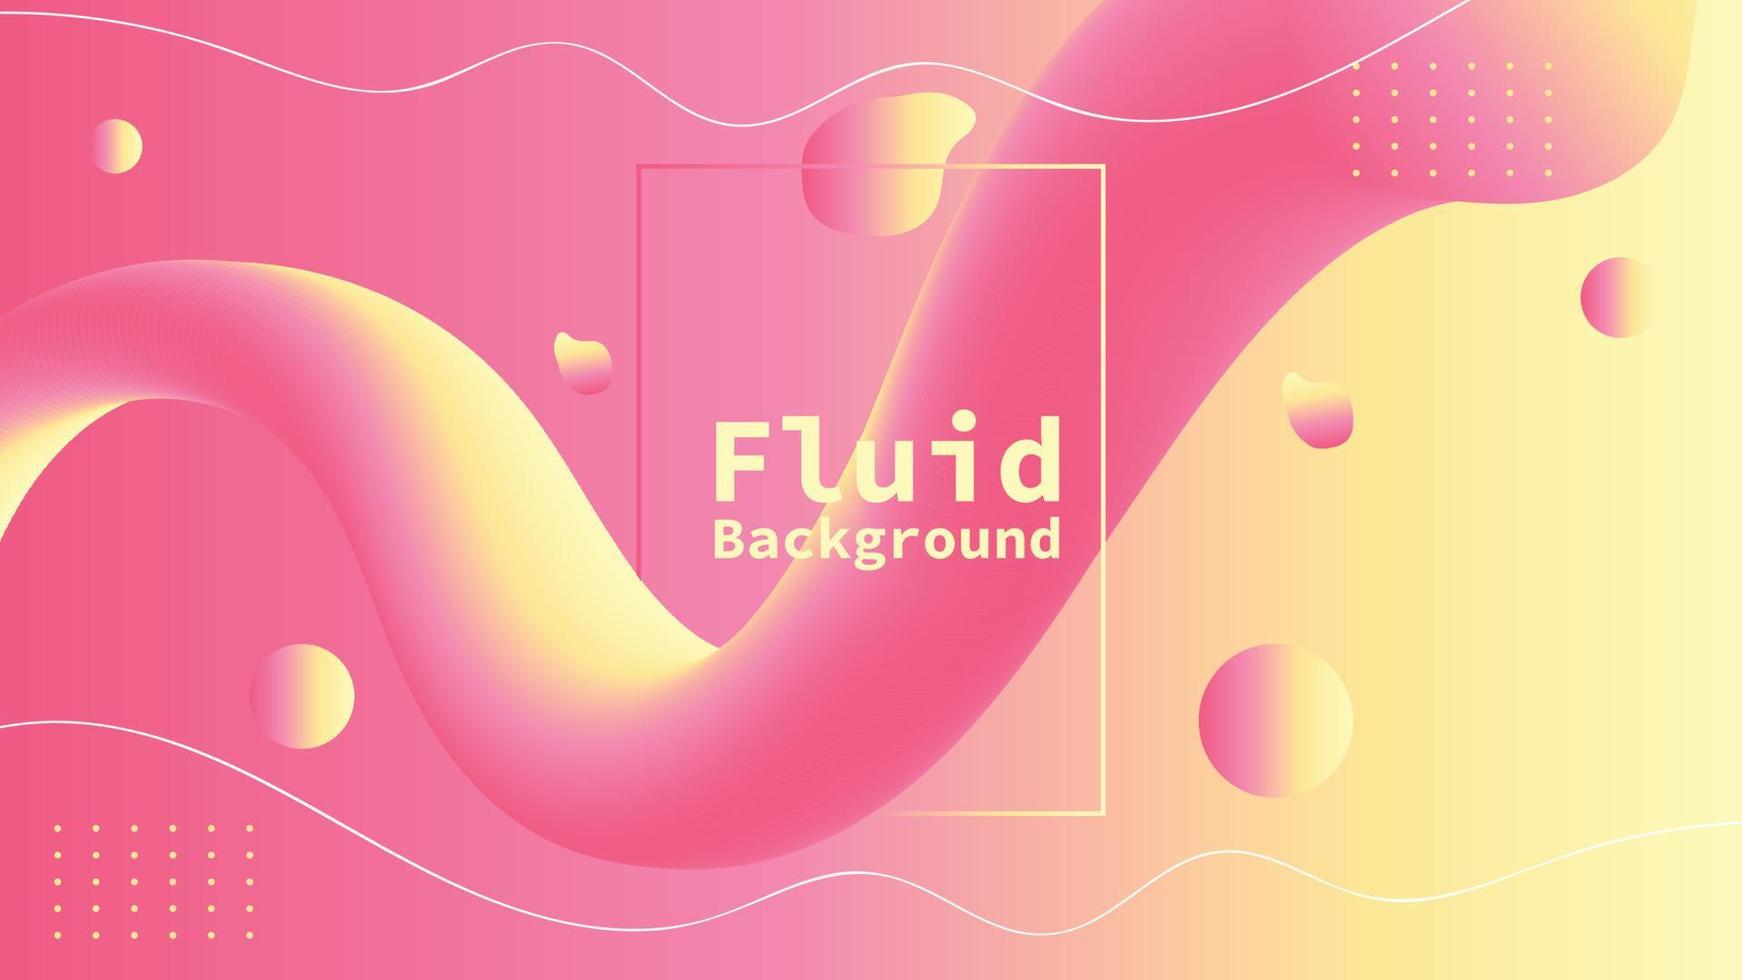 Abstract Fluid Background Design vector